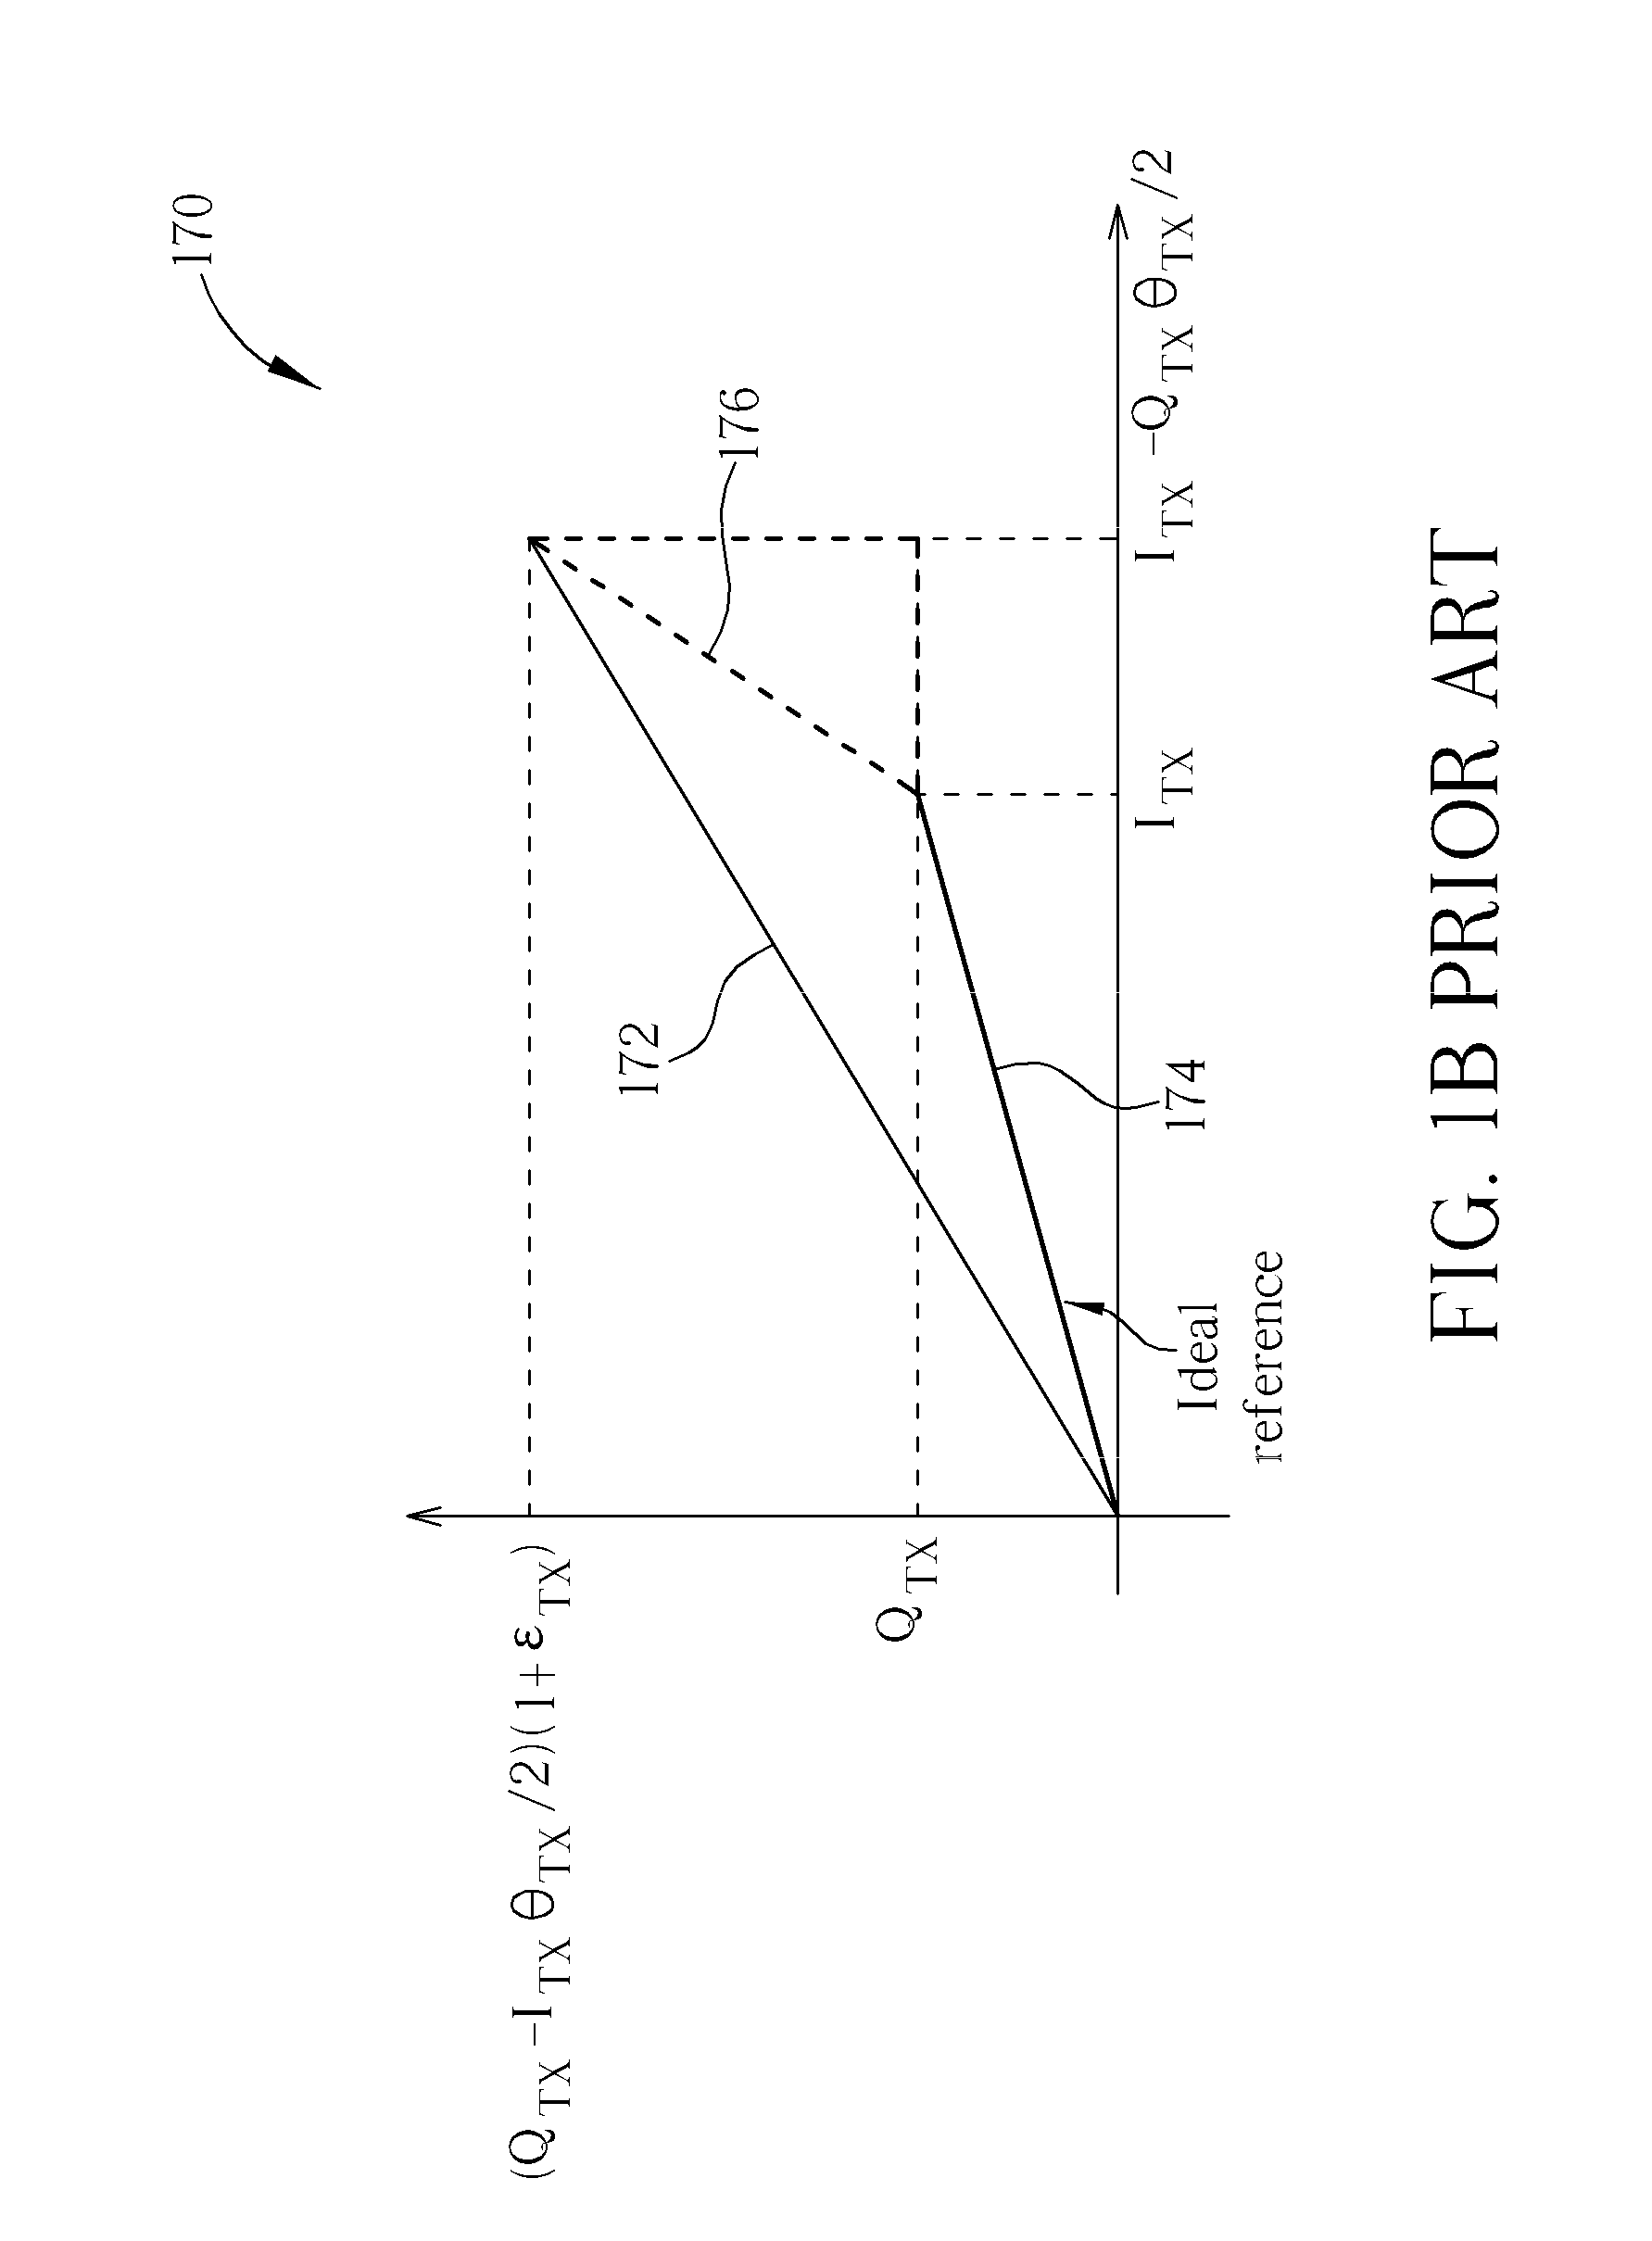 Integrated circuit, wireless communication unit and method for quadrature power detection